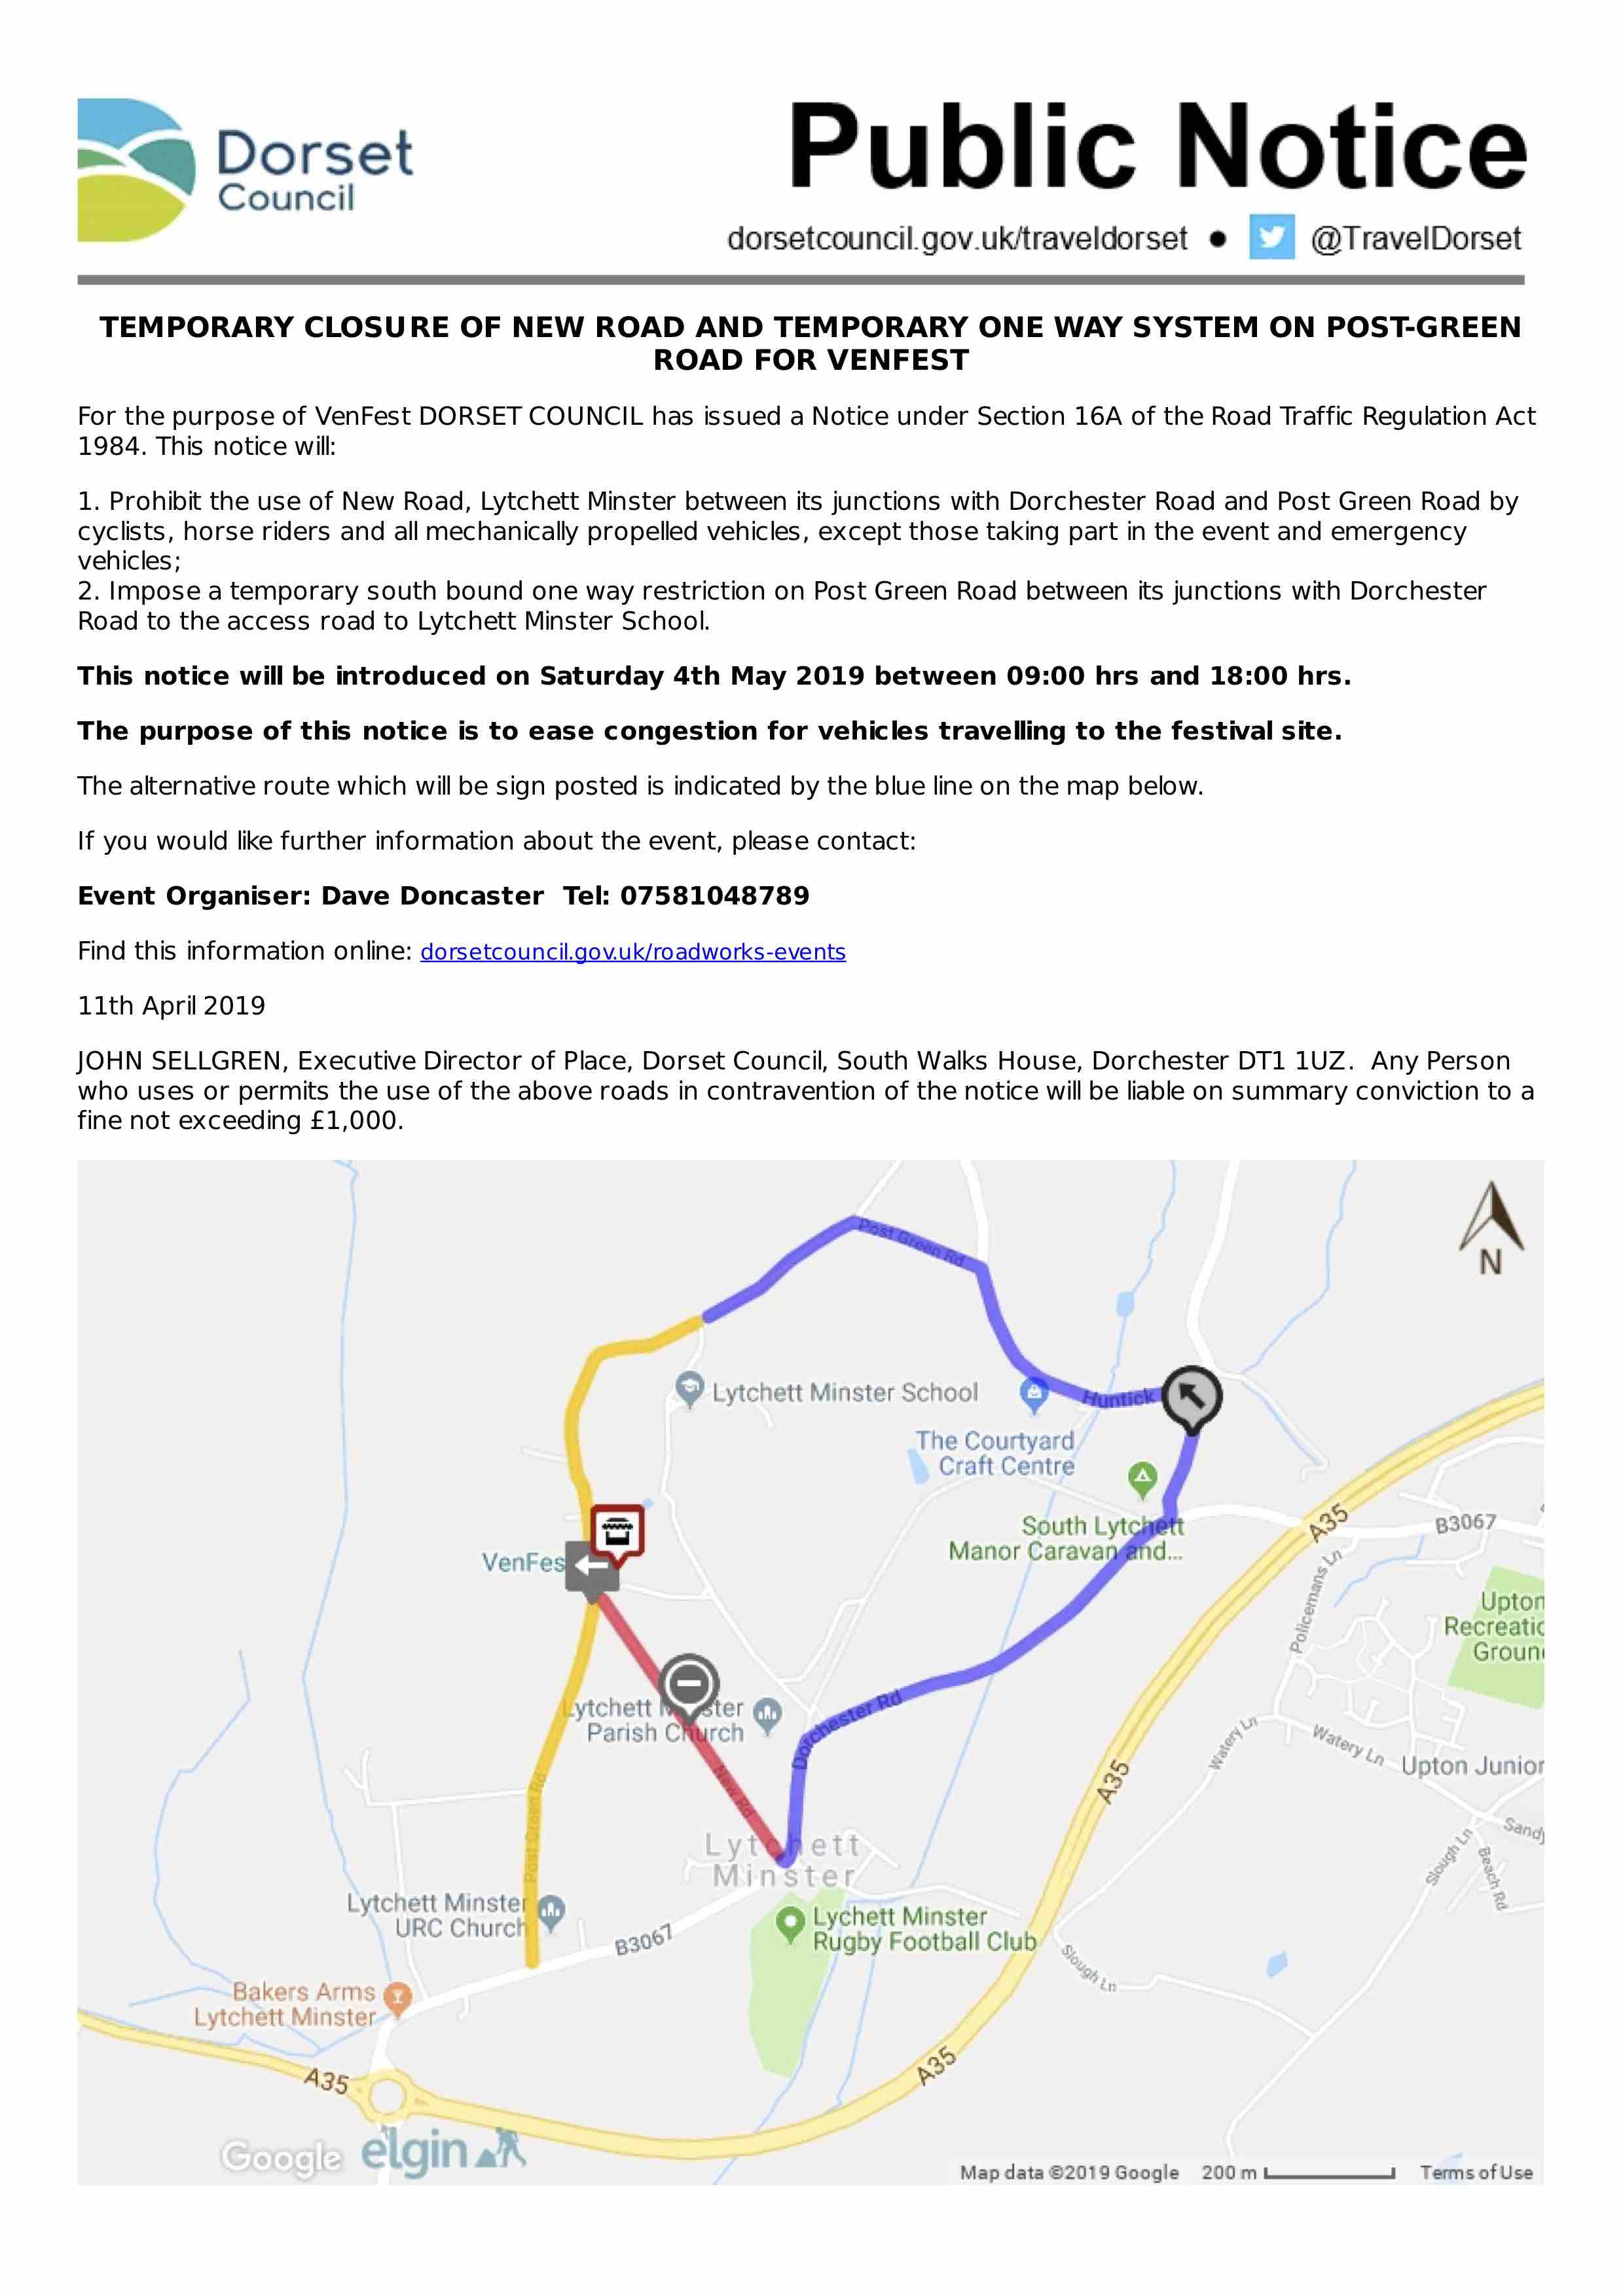 Post Green Road Closure for Venfest